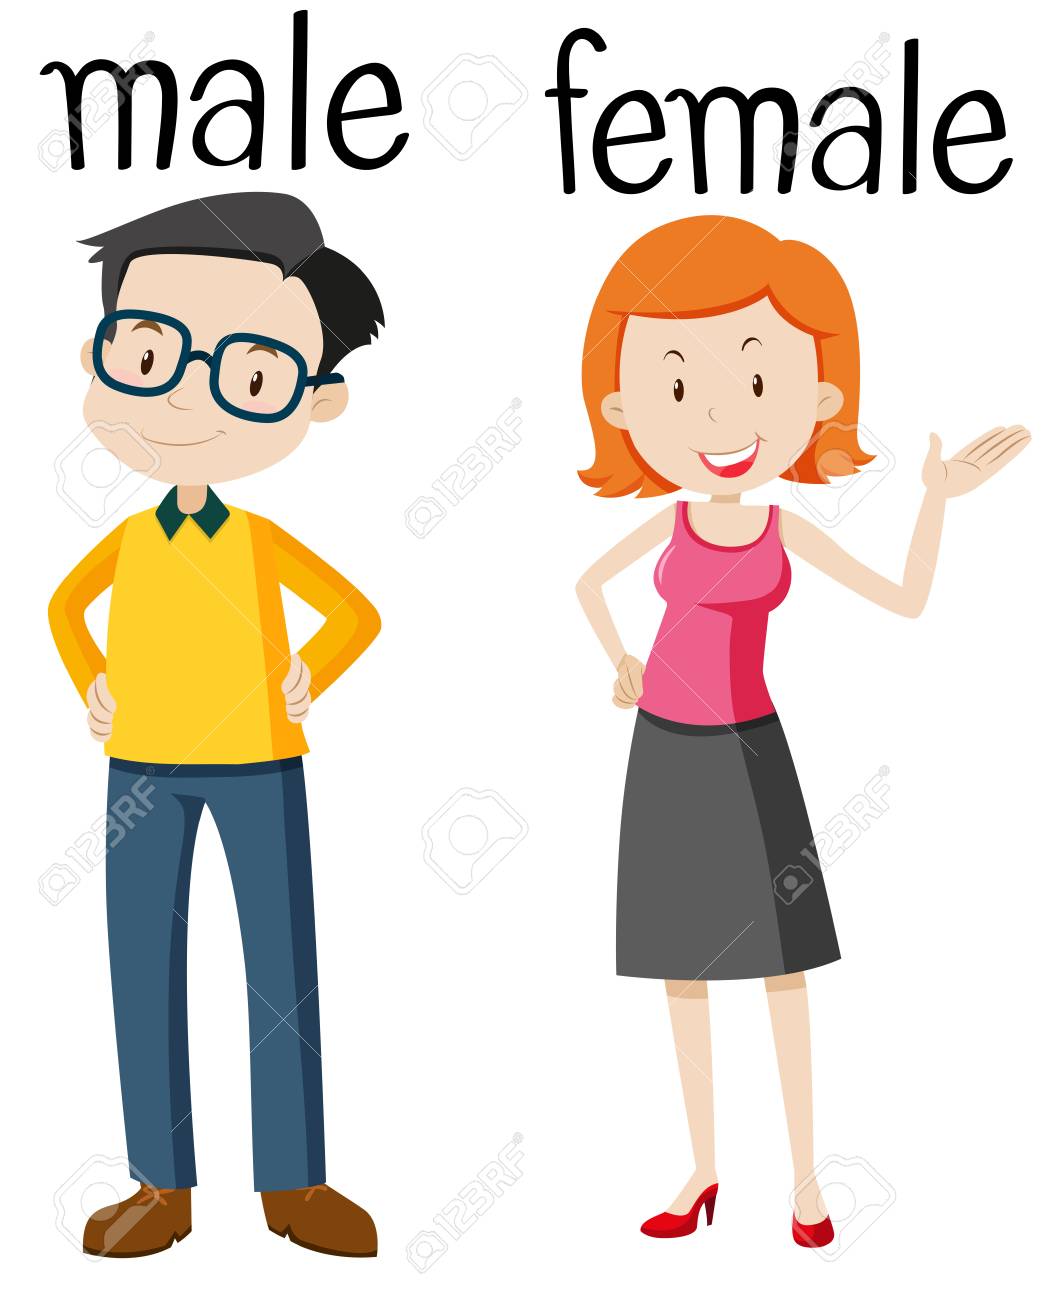 Opposite wordcard for male and female